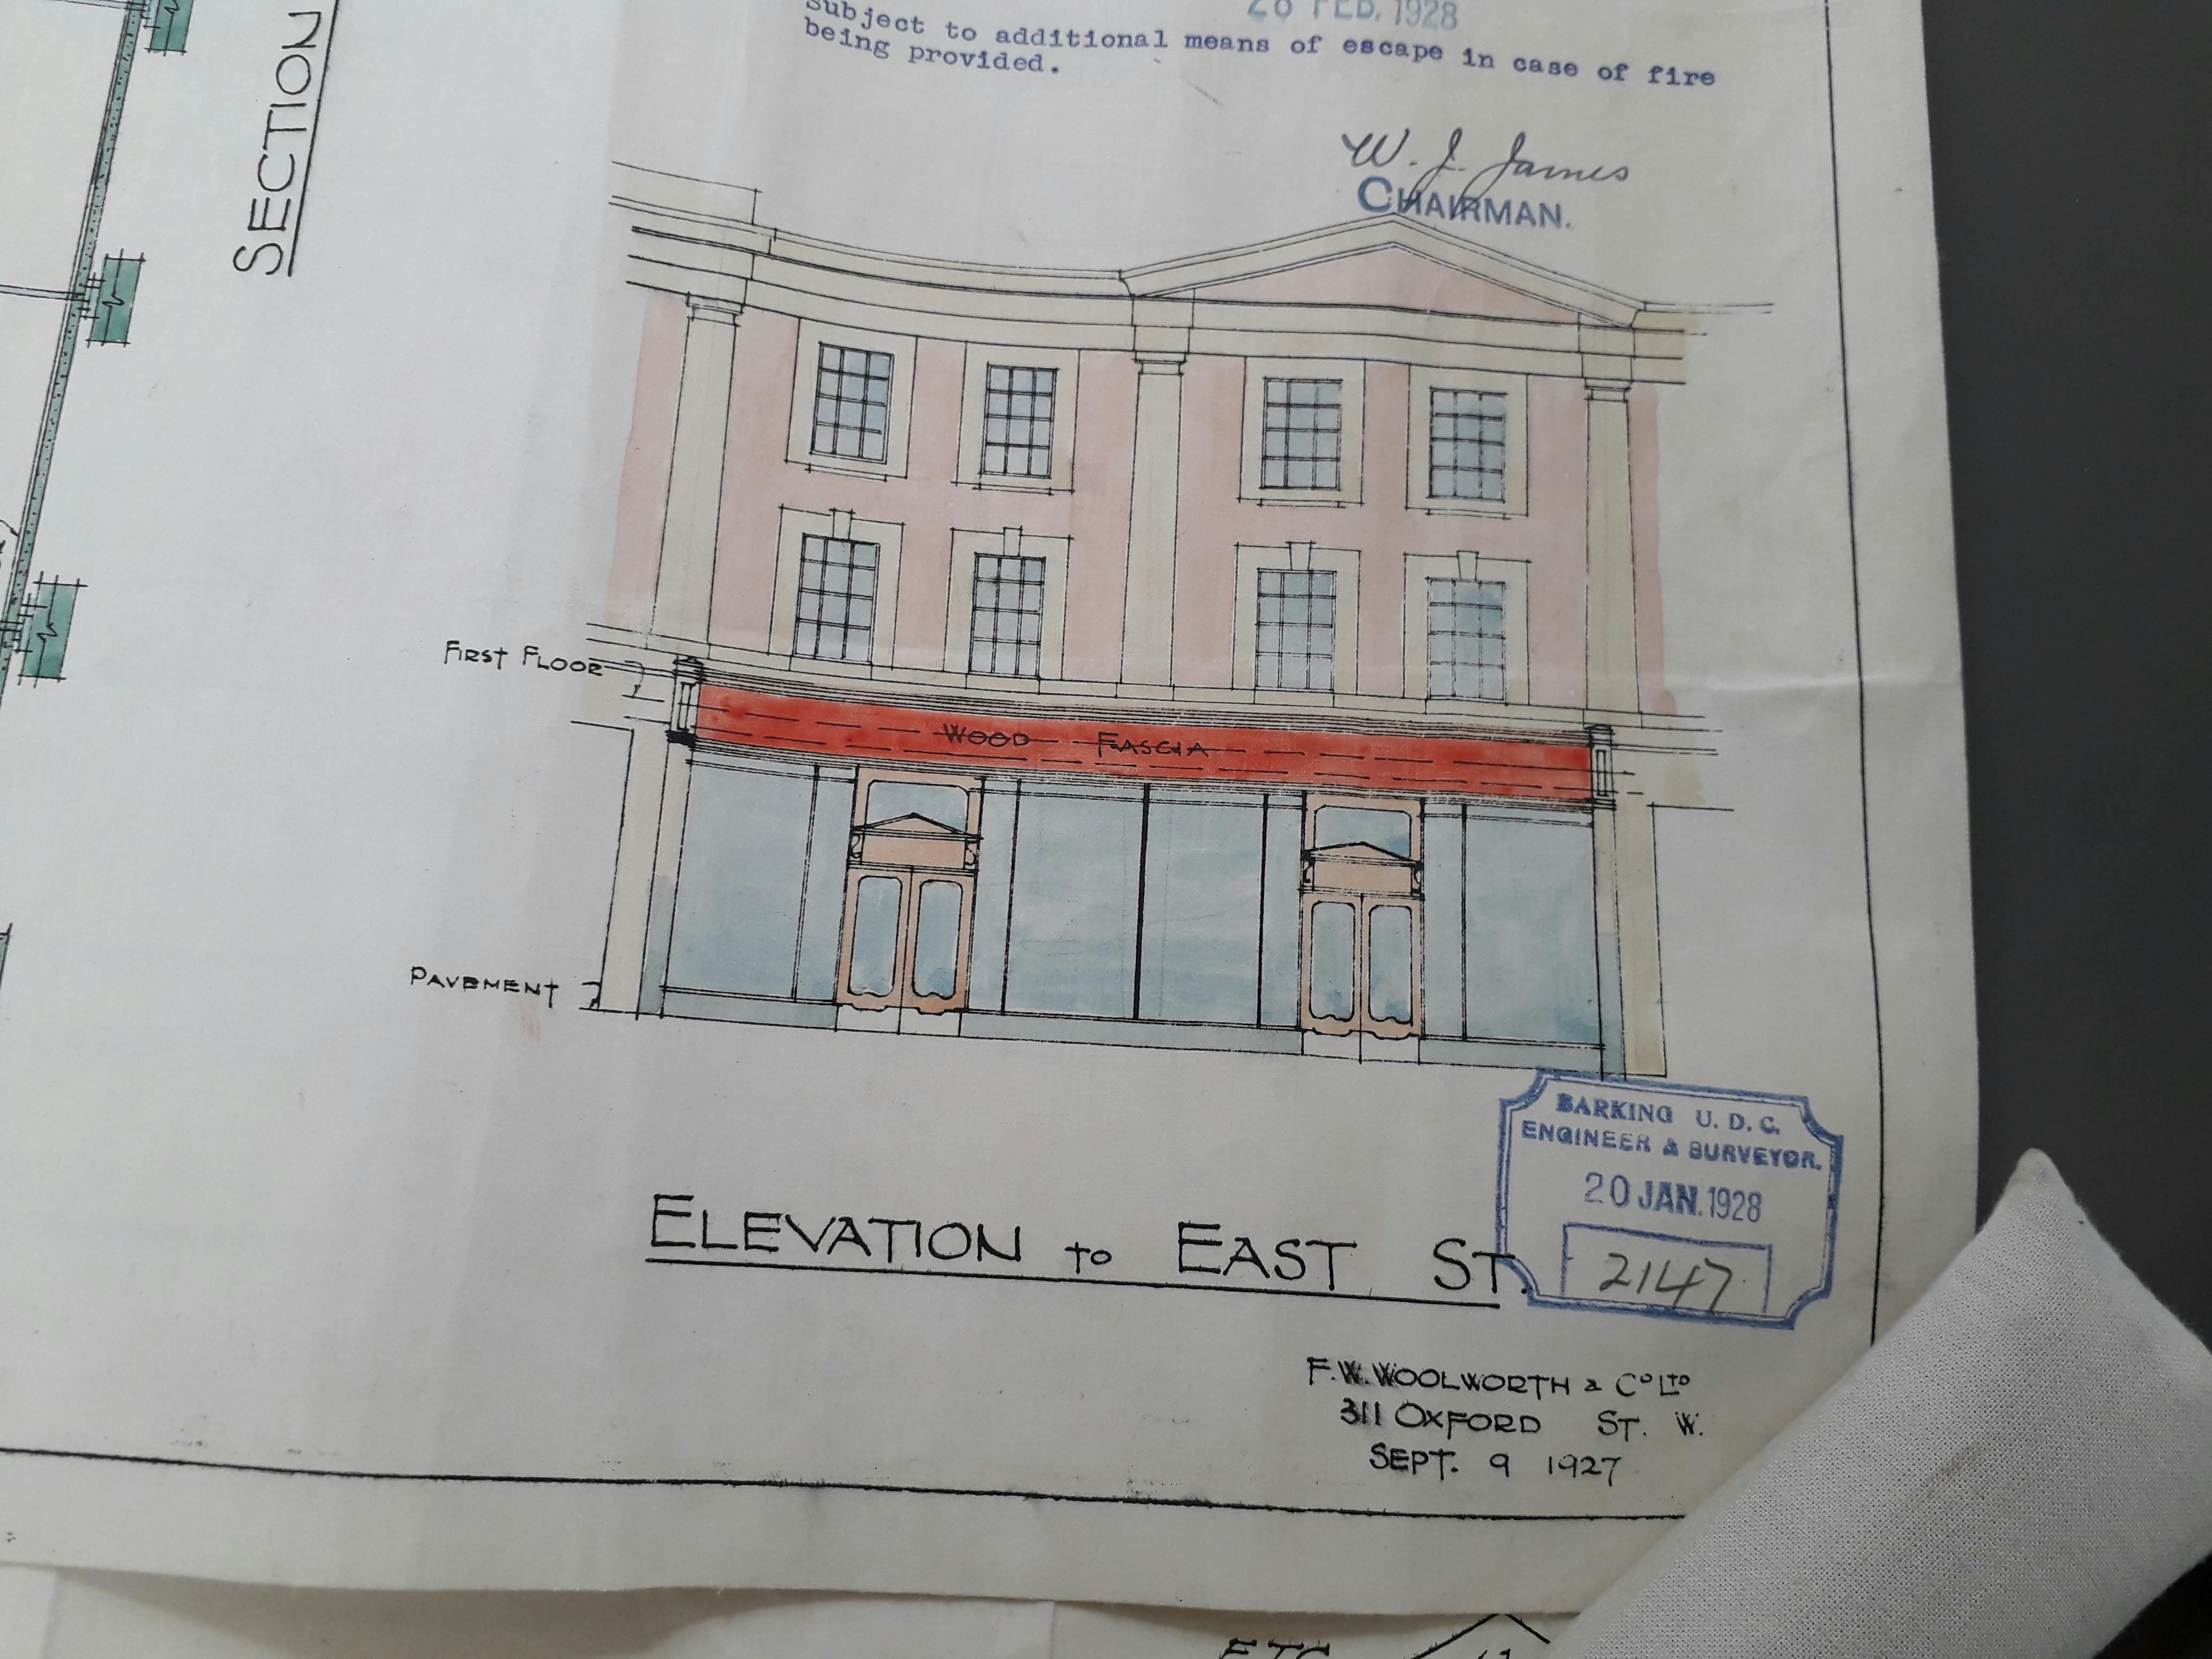 Woolworths Building Plans - front elevation 1927-8